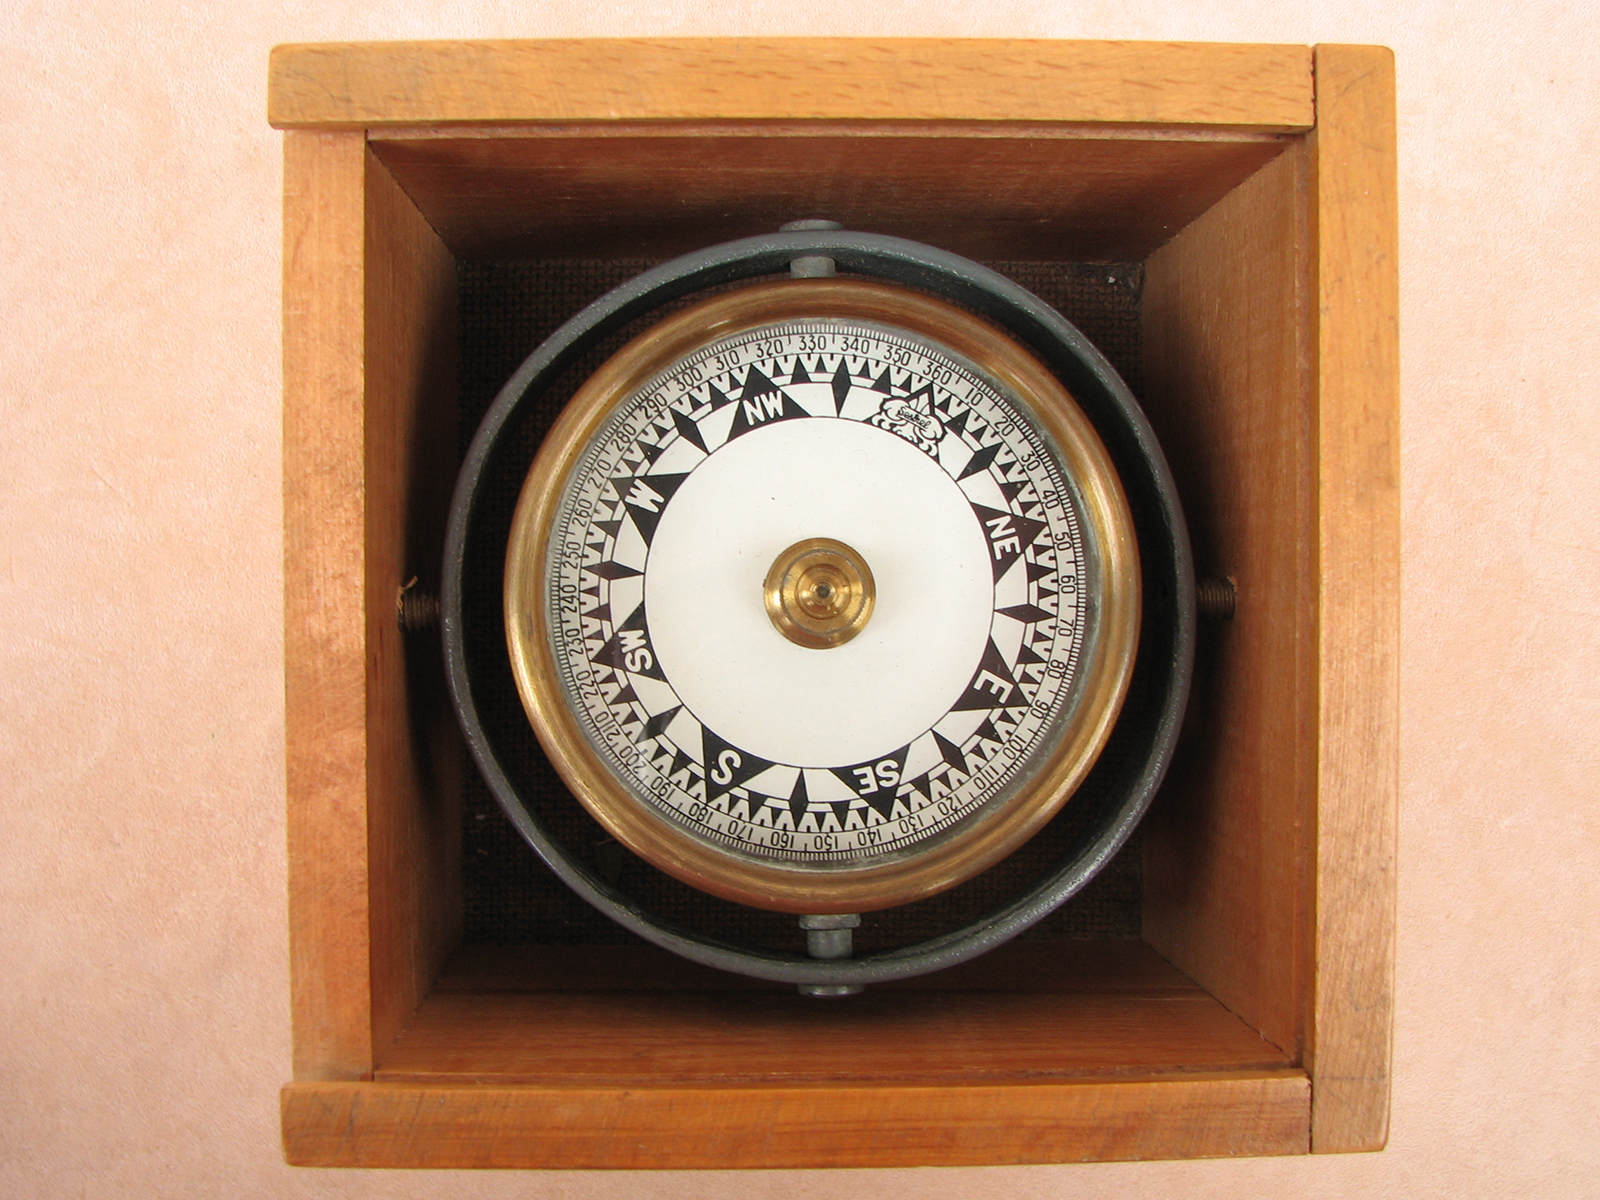 Sestrel gimbal mounted ships compass by Henry Browne & Son